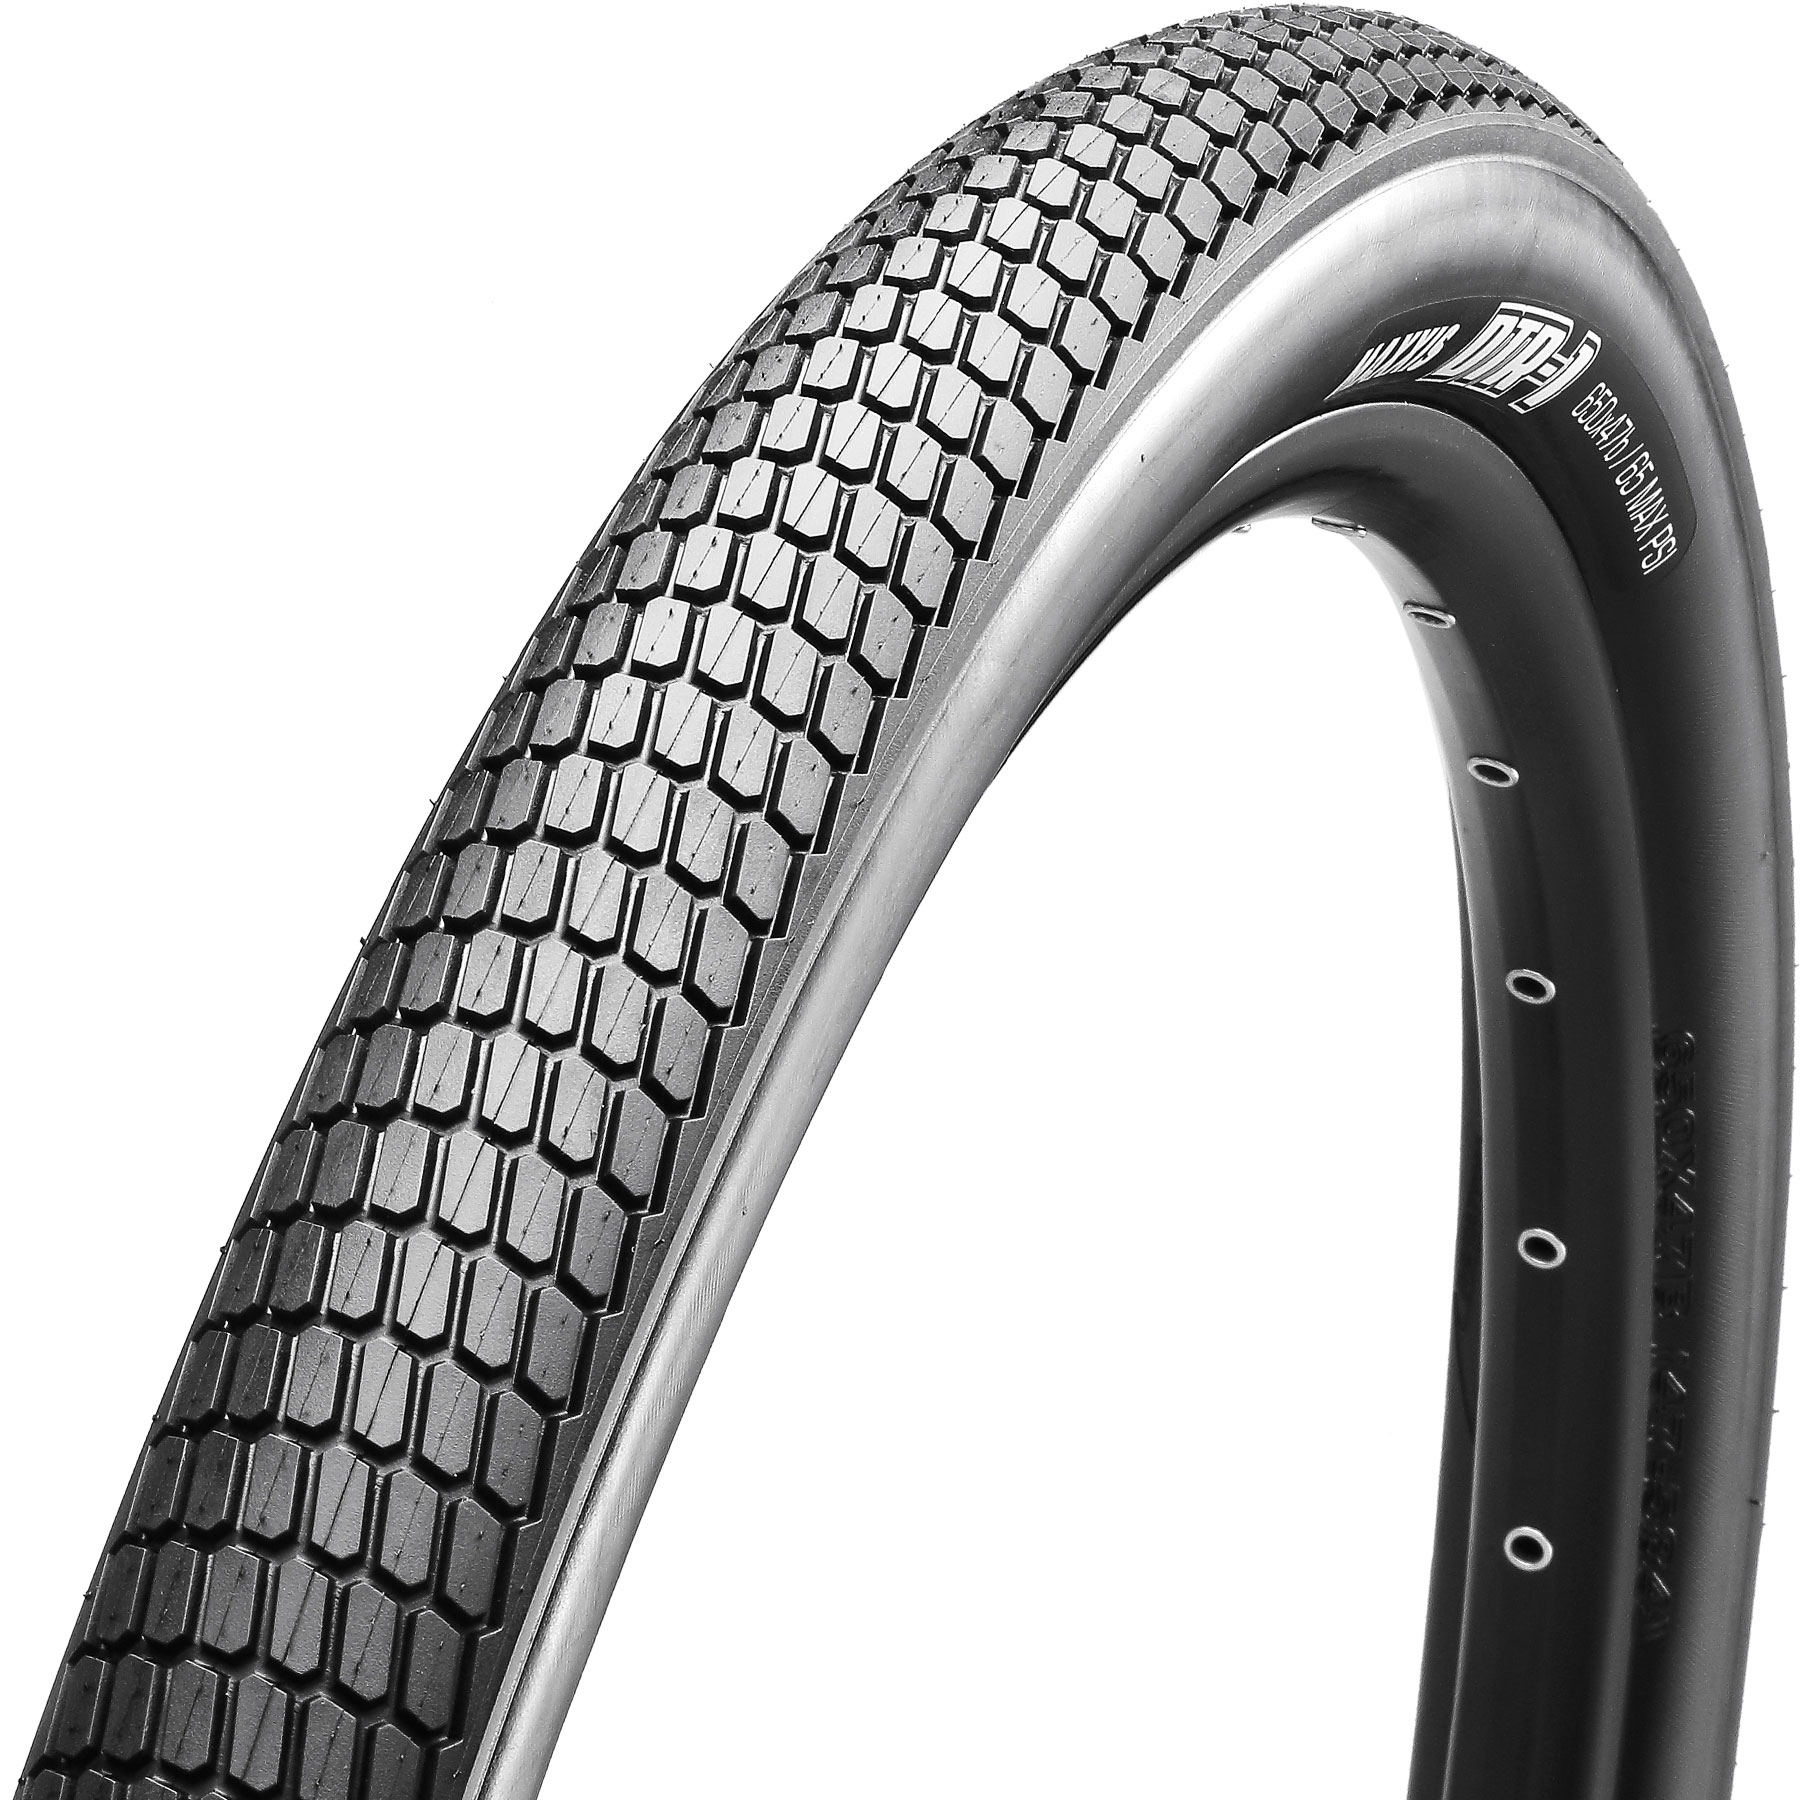 650b X 47 Clincher Wire Black Dual for sale online Maxxis Dtr-1 Tire 